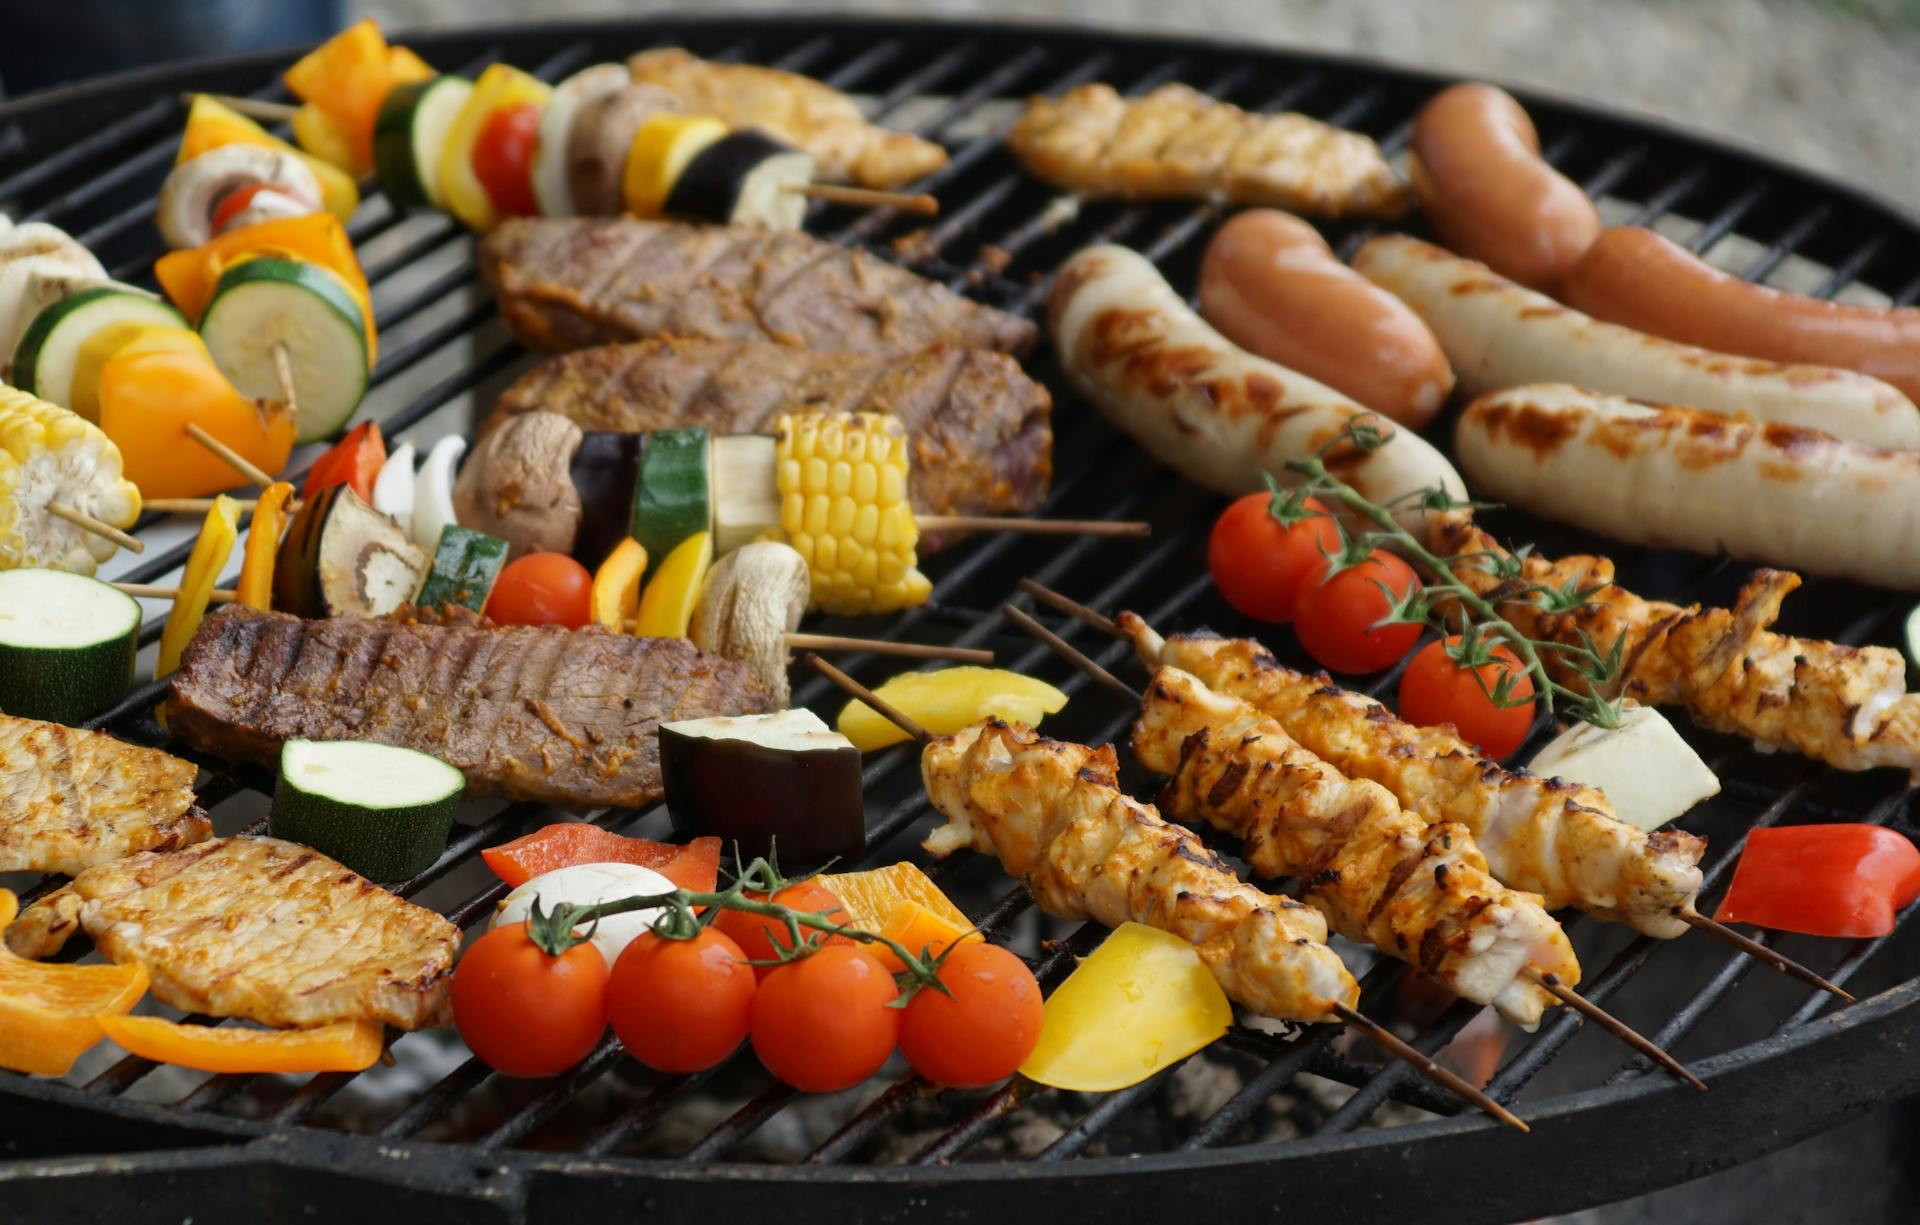 Barbecue sticks lying on a charcoal grill | Source: Pexels